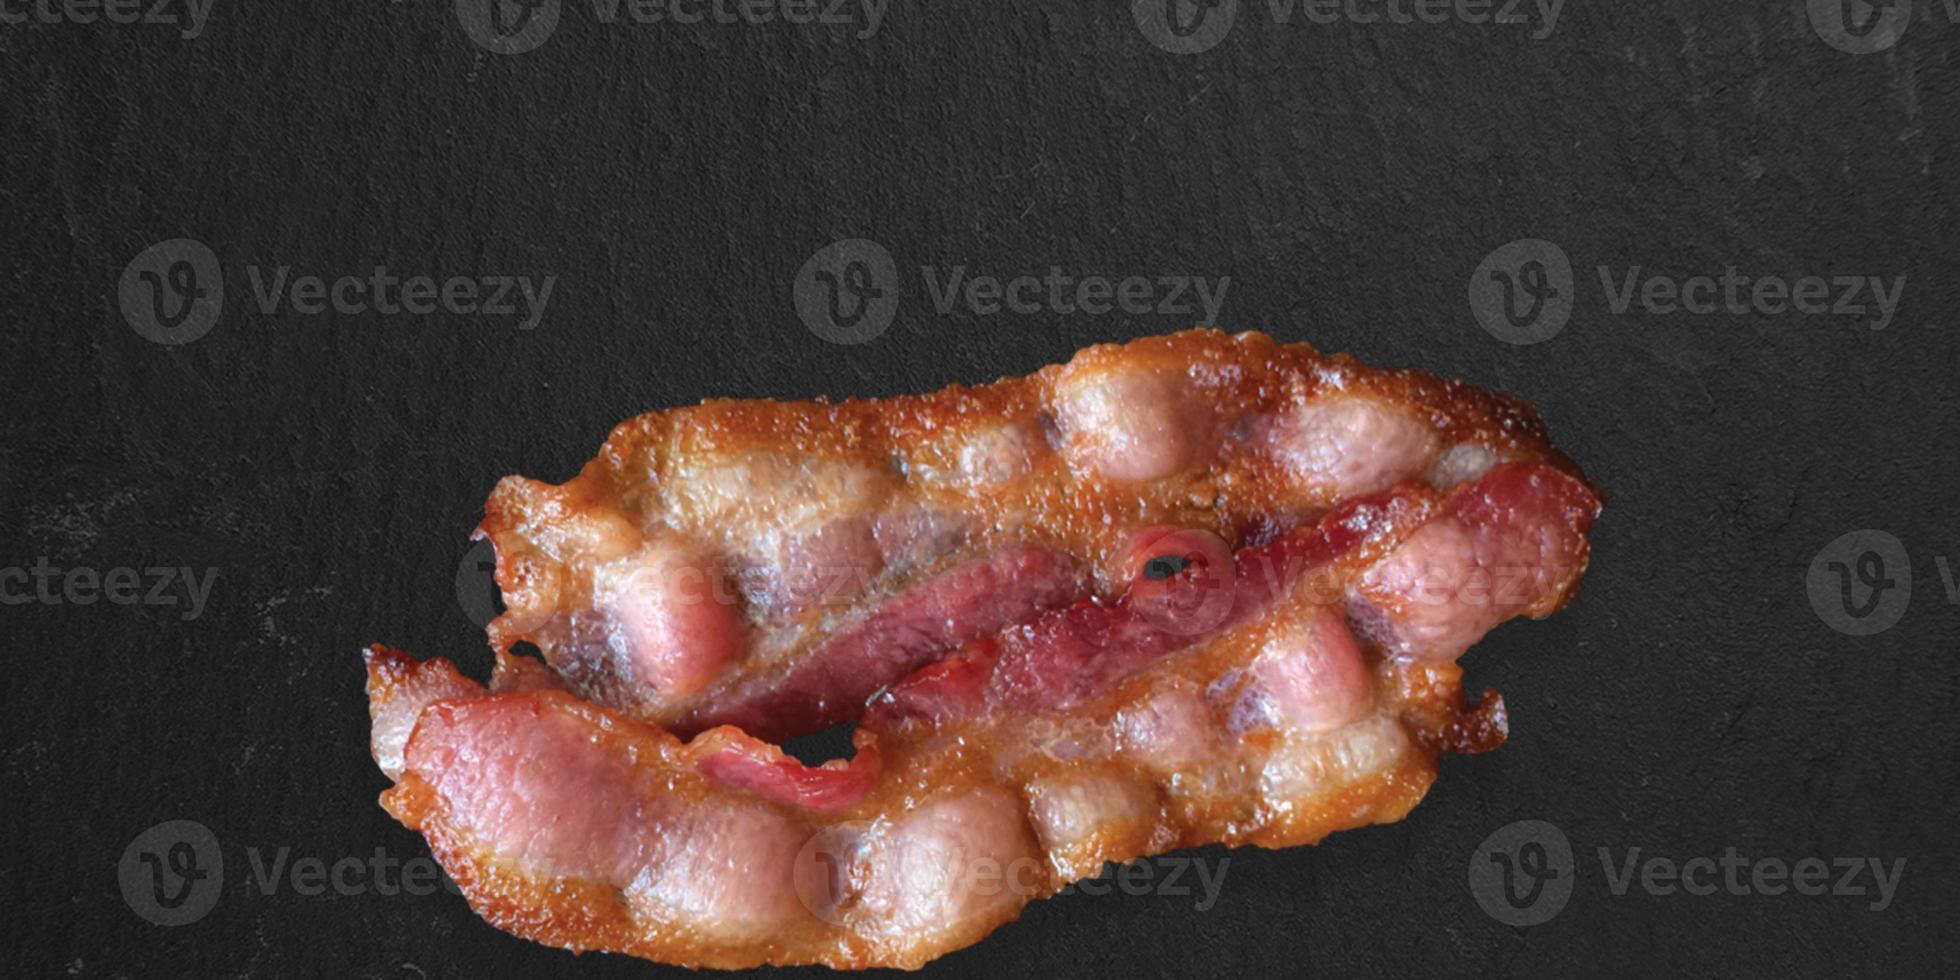 crispy thick cut smoked bacon slices isolated on dark background, close up view suitable for food design project. photo